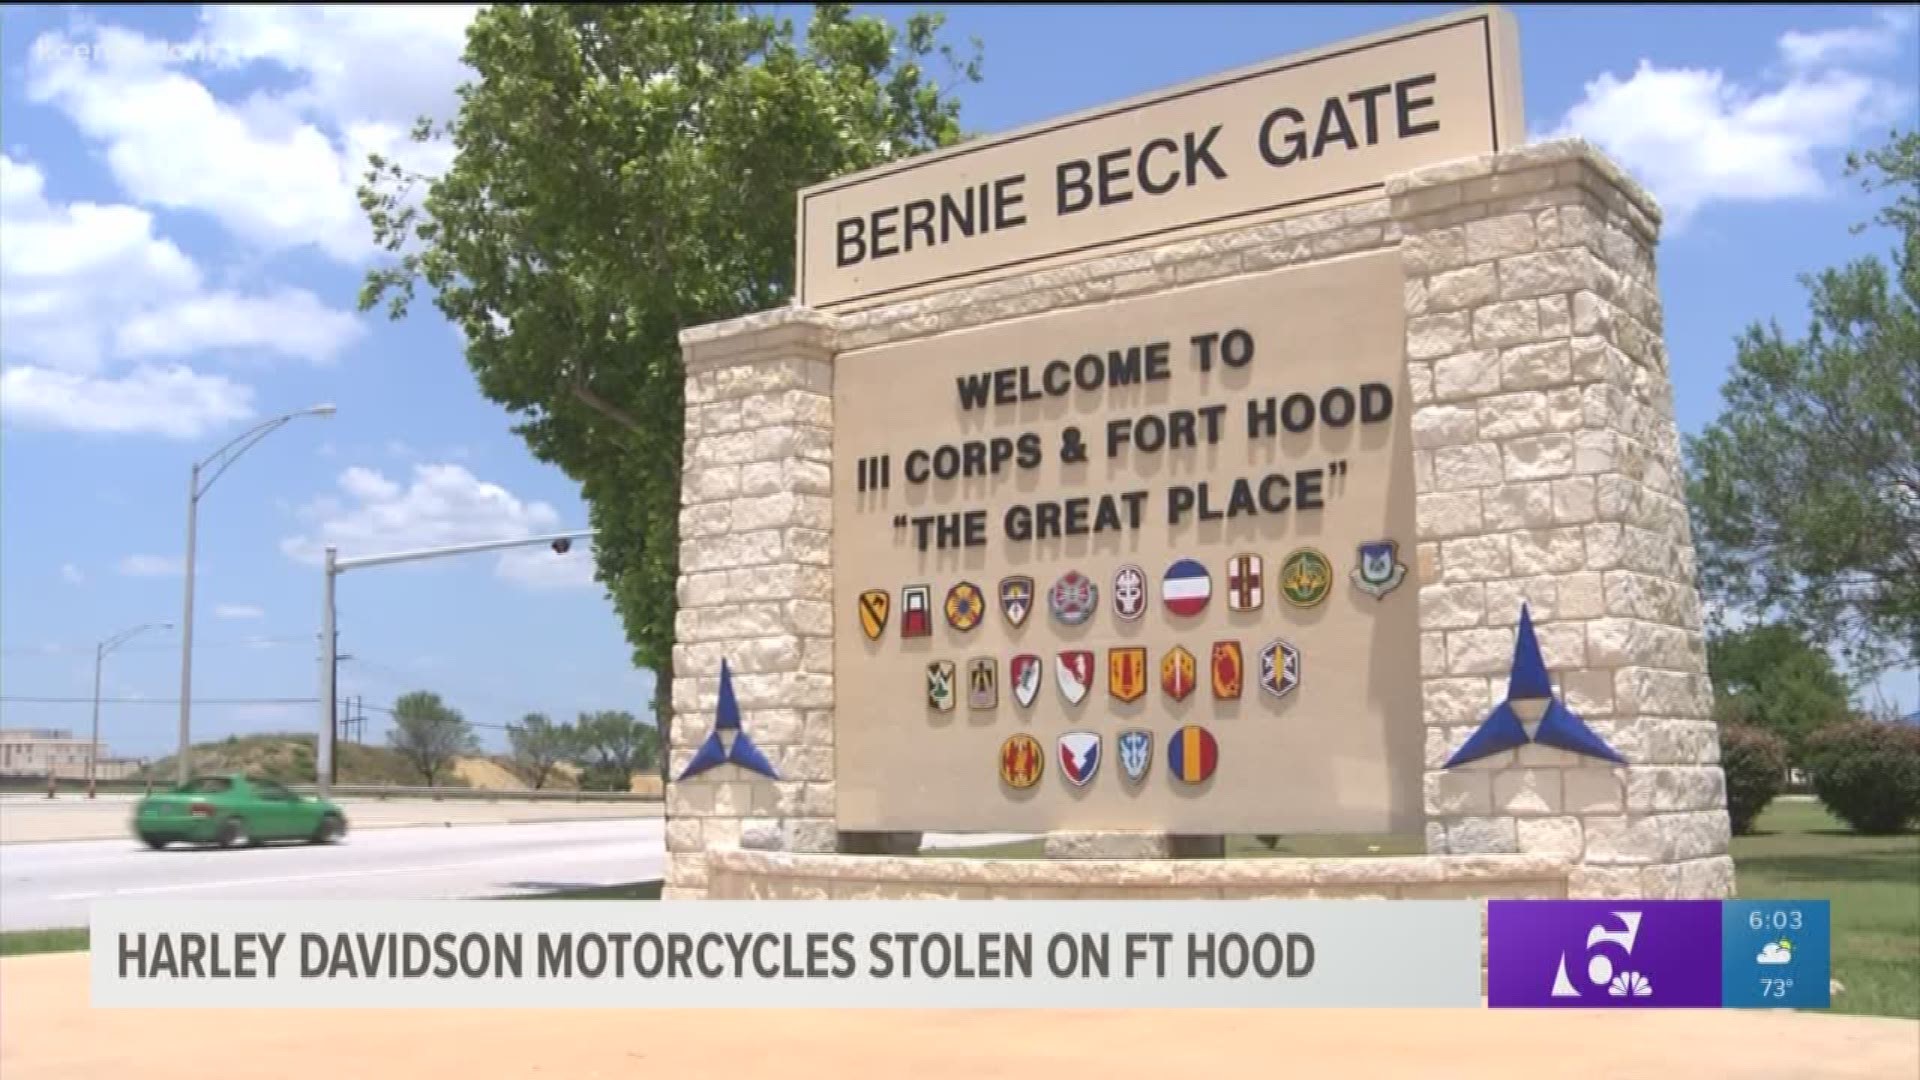 Fort Hood is warning soldiers to be vigilant after multiple Harley Davidson motorcycles were stolen on post. 